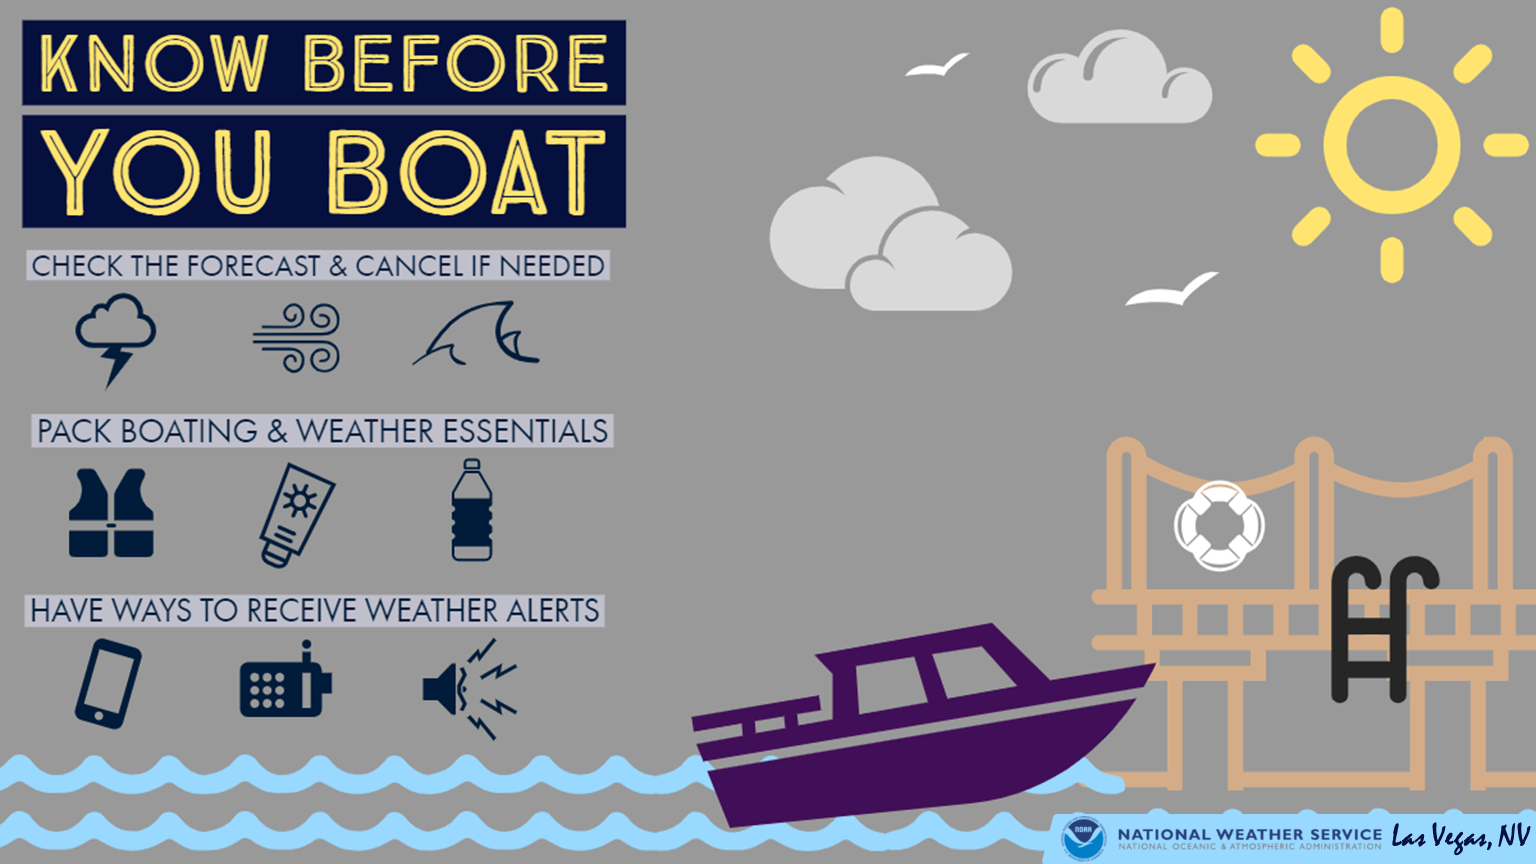 https://www.weather.gov/images/vef/Education%20Infographics/Boating/BoatSafety.png